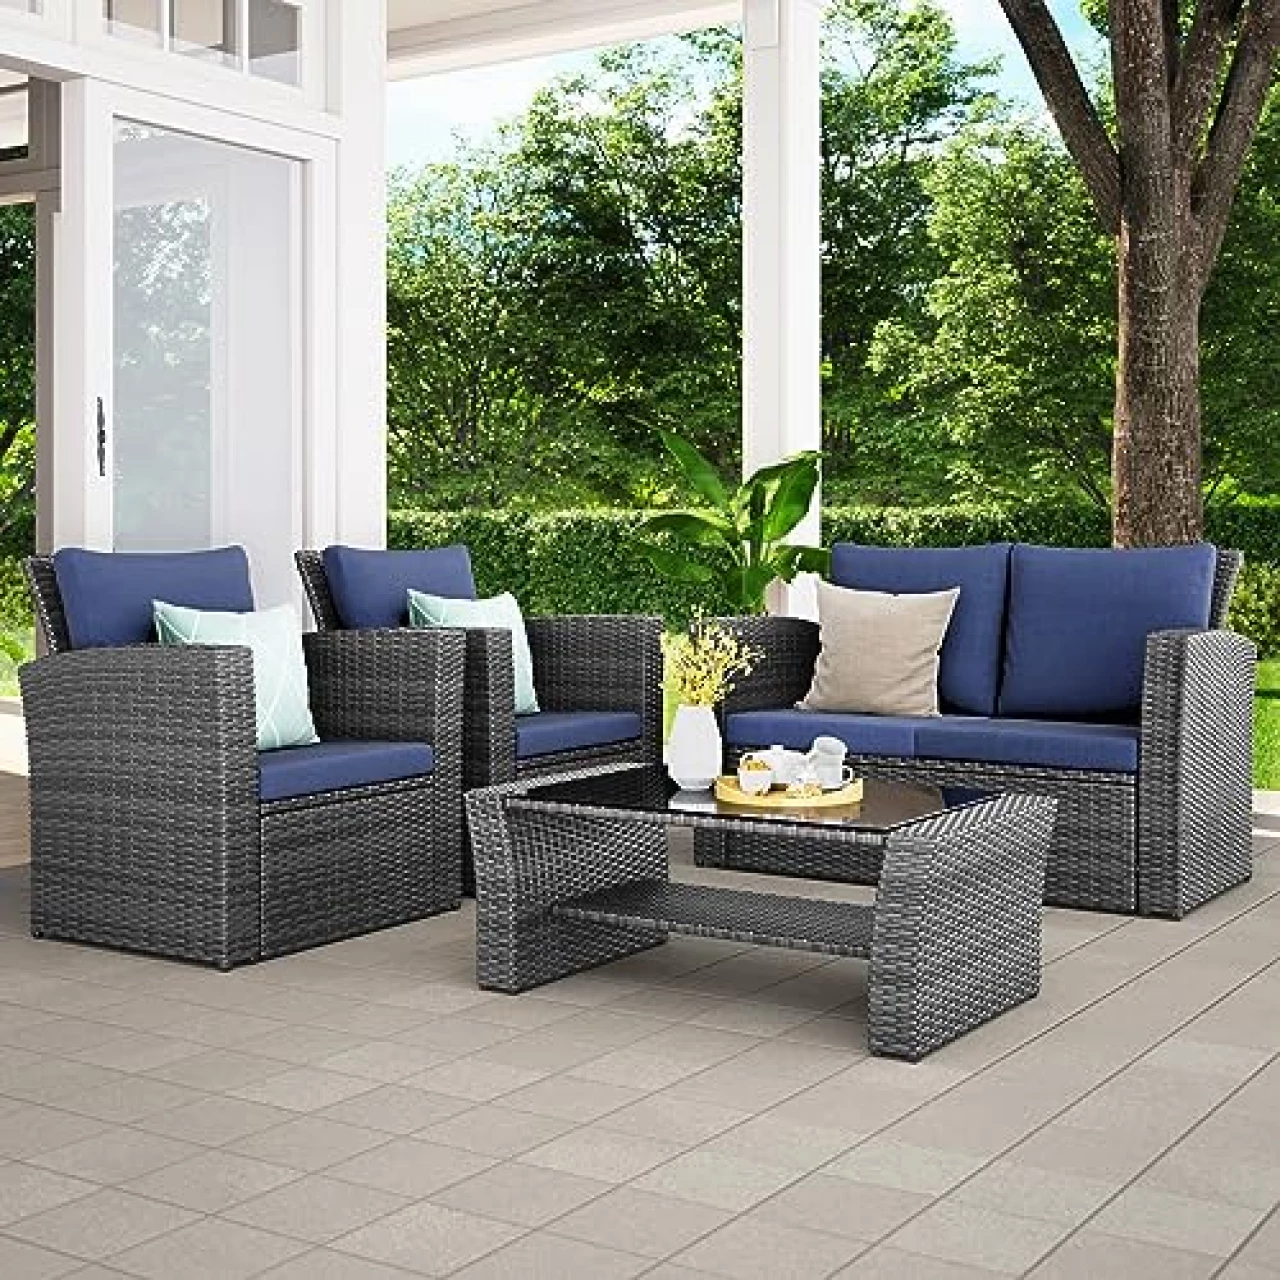 Wisteria Lane 4 Piece Outdoor Patio Furniture Sets, Wicker Conversation Set for Porch Deck, Grey Rattan Sofa Chair with Cushion